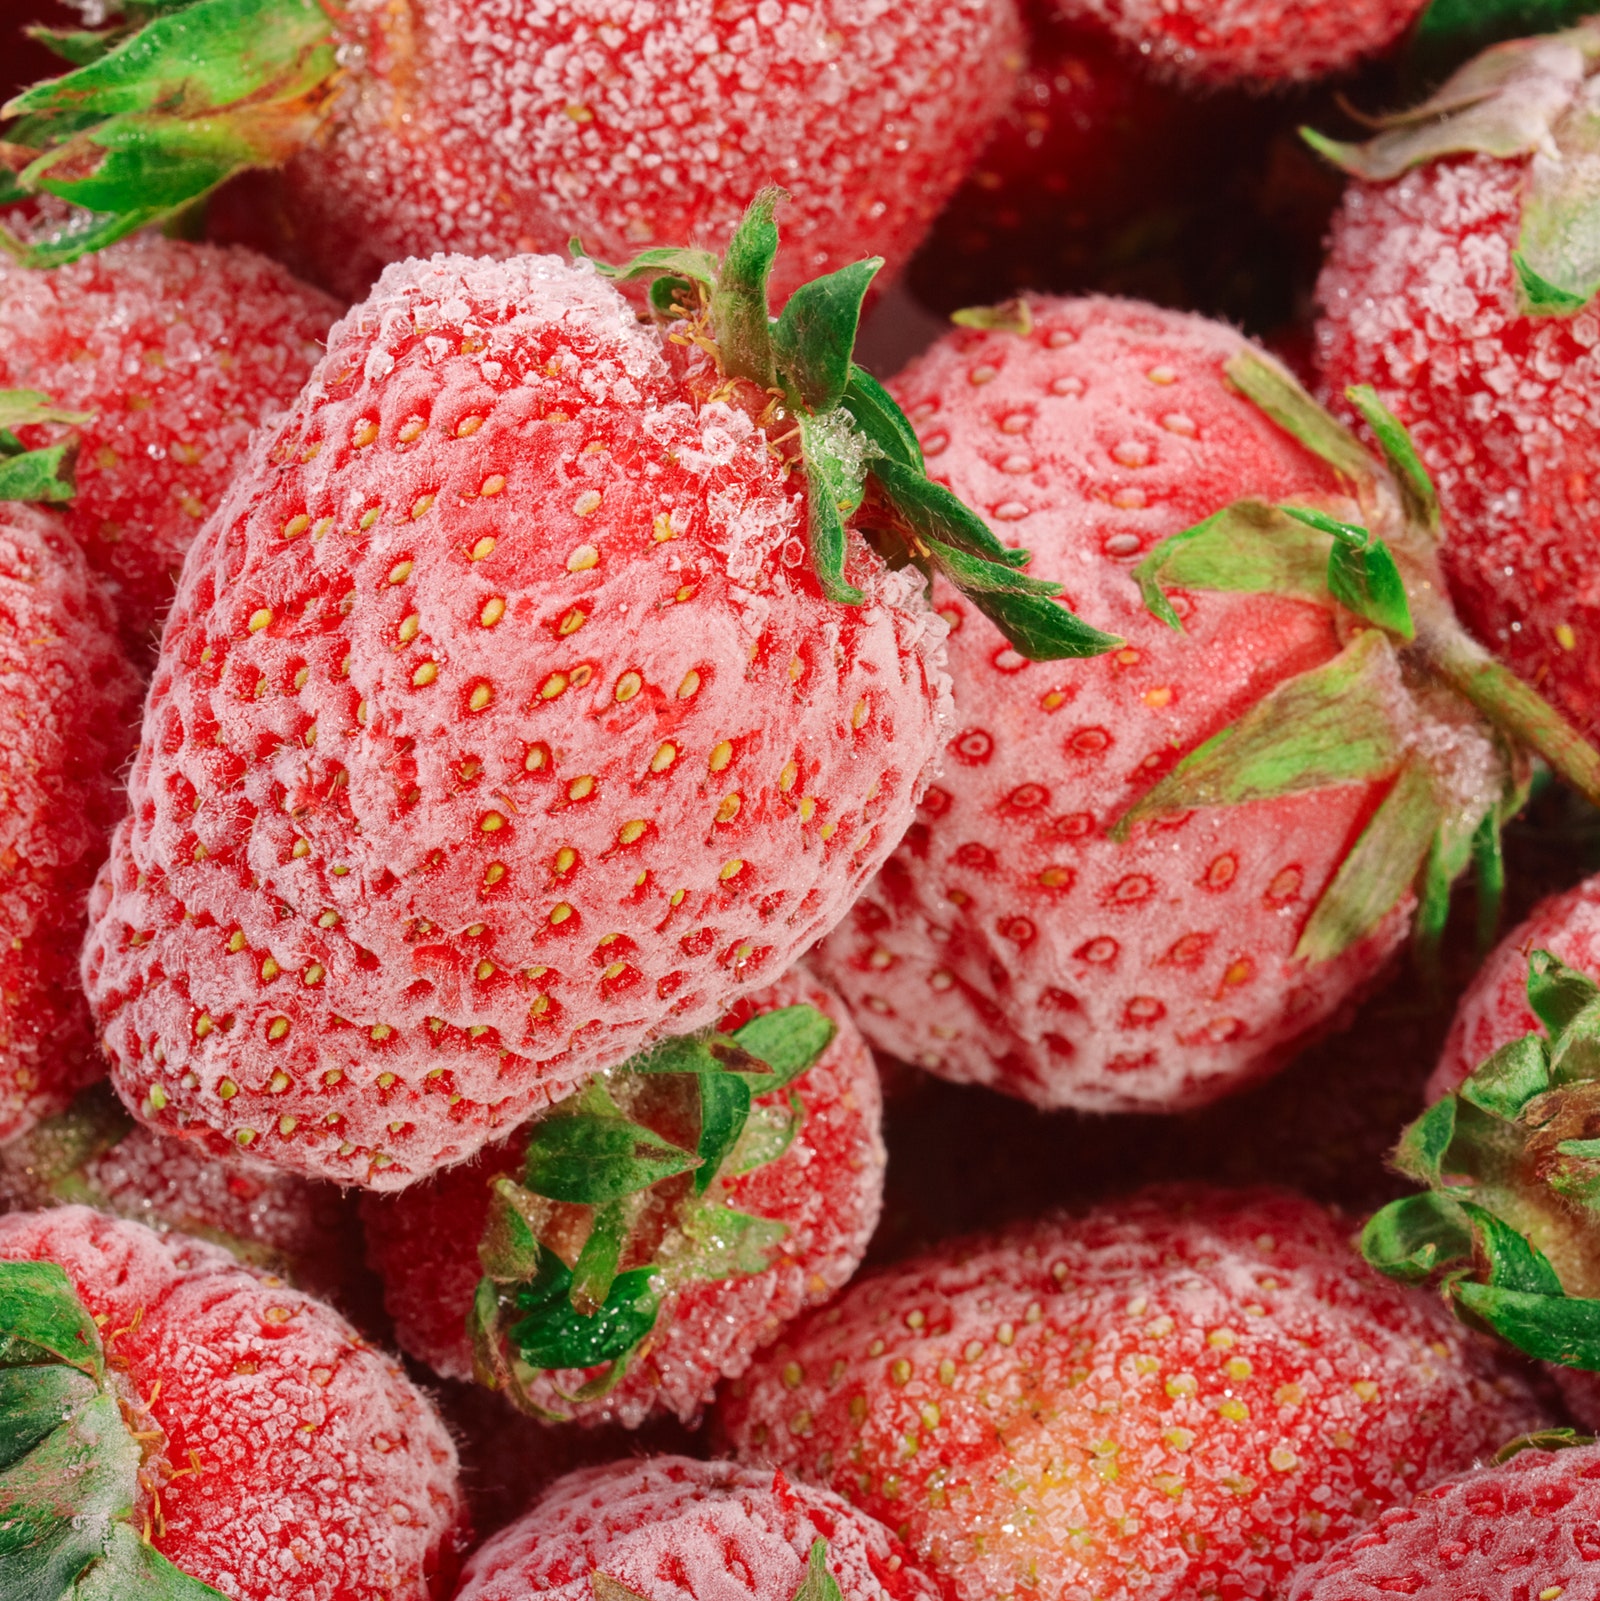 Check Your Freezer&-A Bunch of Fruit From Walmart, Costco, and Other Stores Just Got Recalled